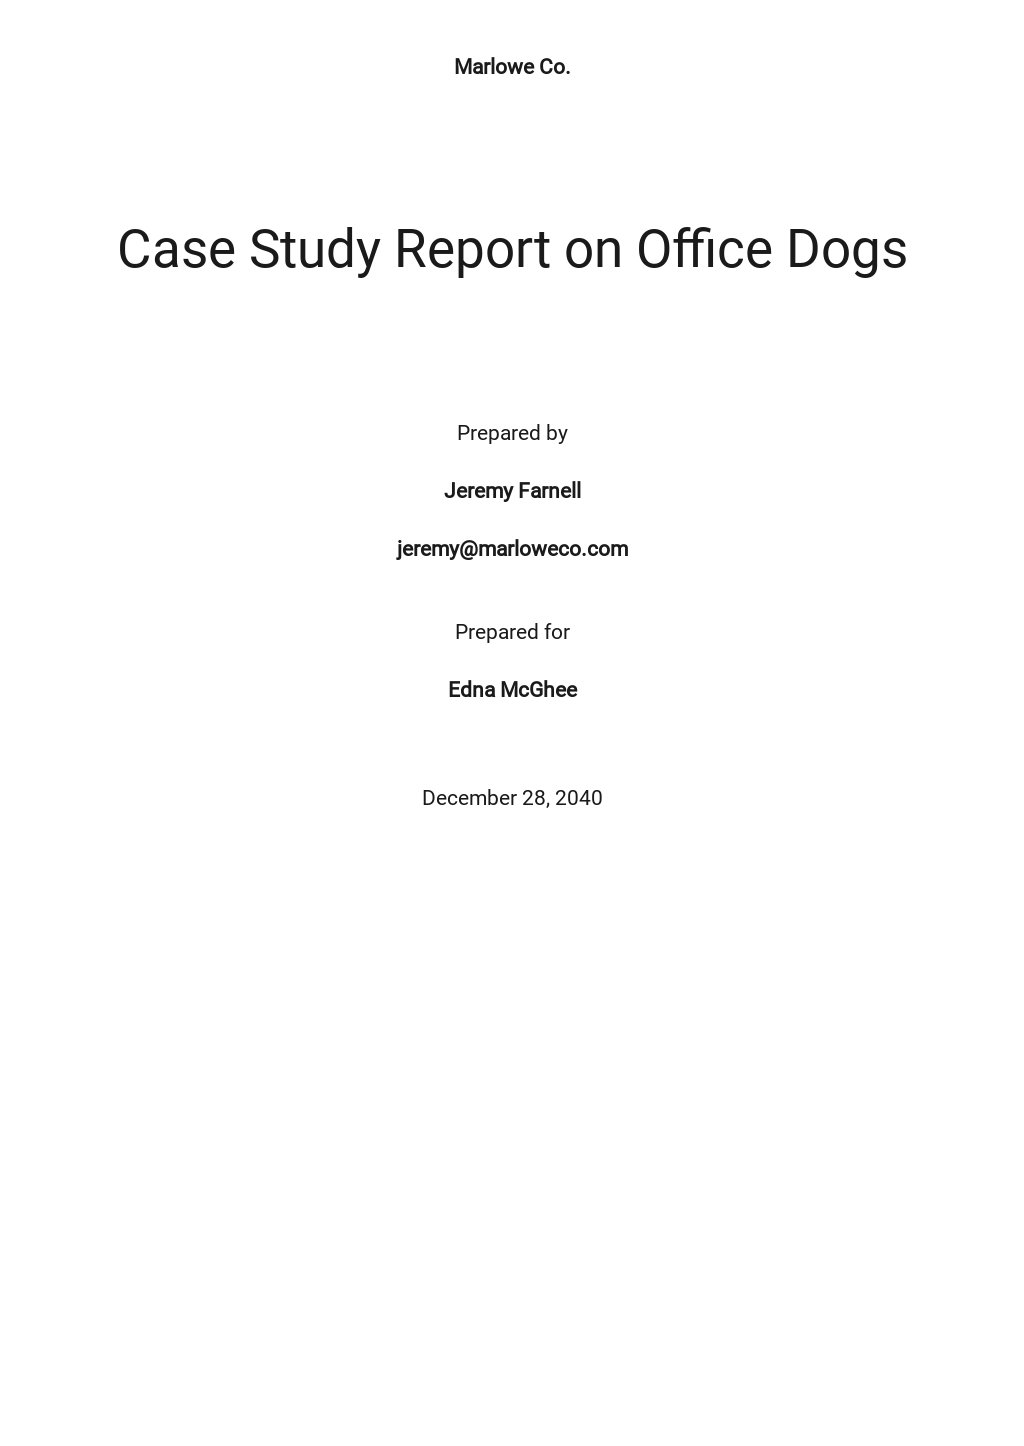 Case Study Report Template [Free PDF] Word (DOC) Apple (MAC) Pages